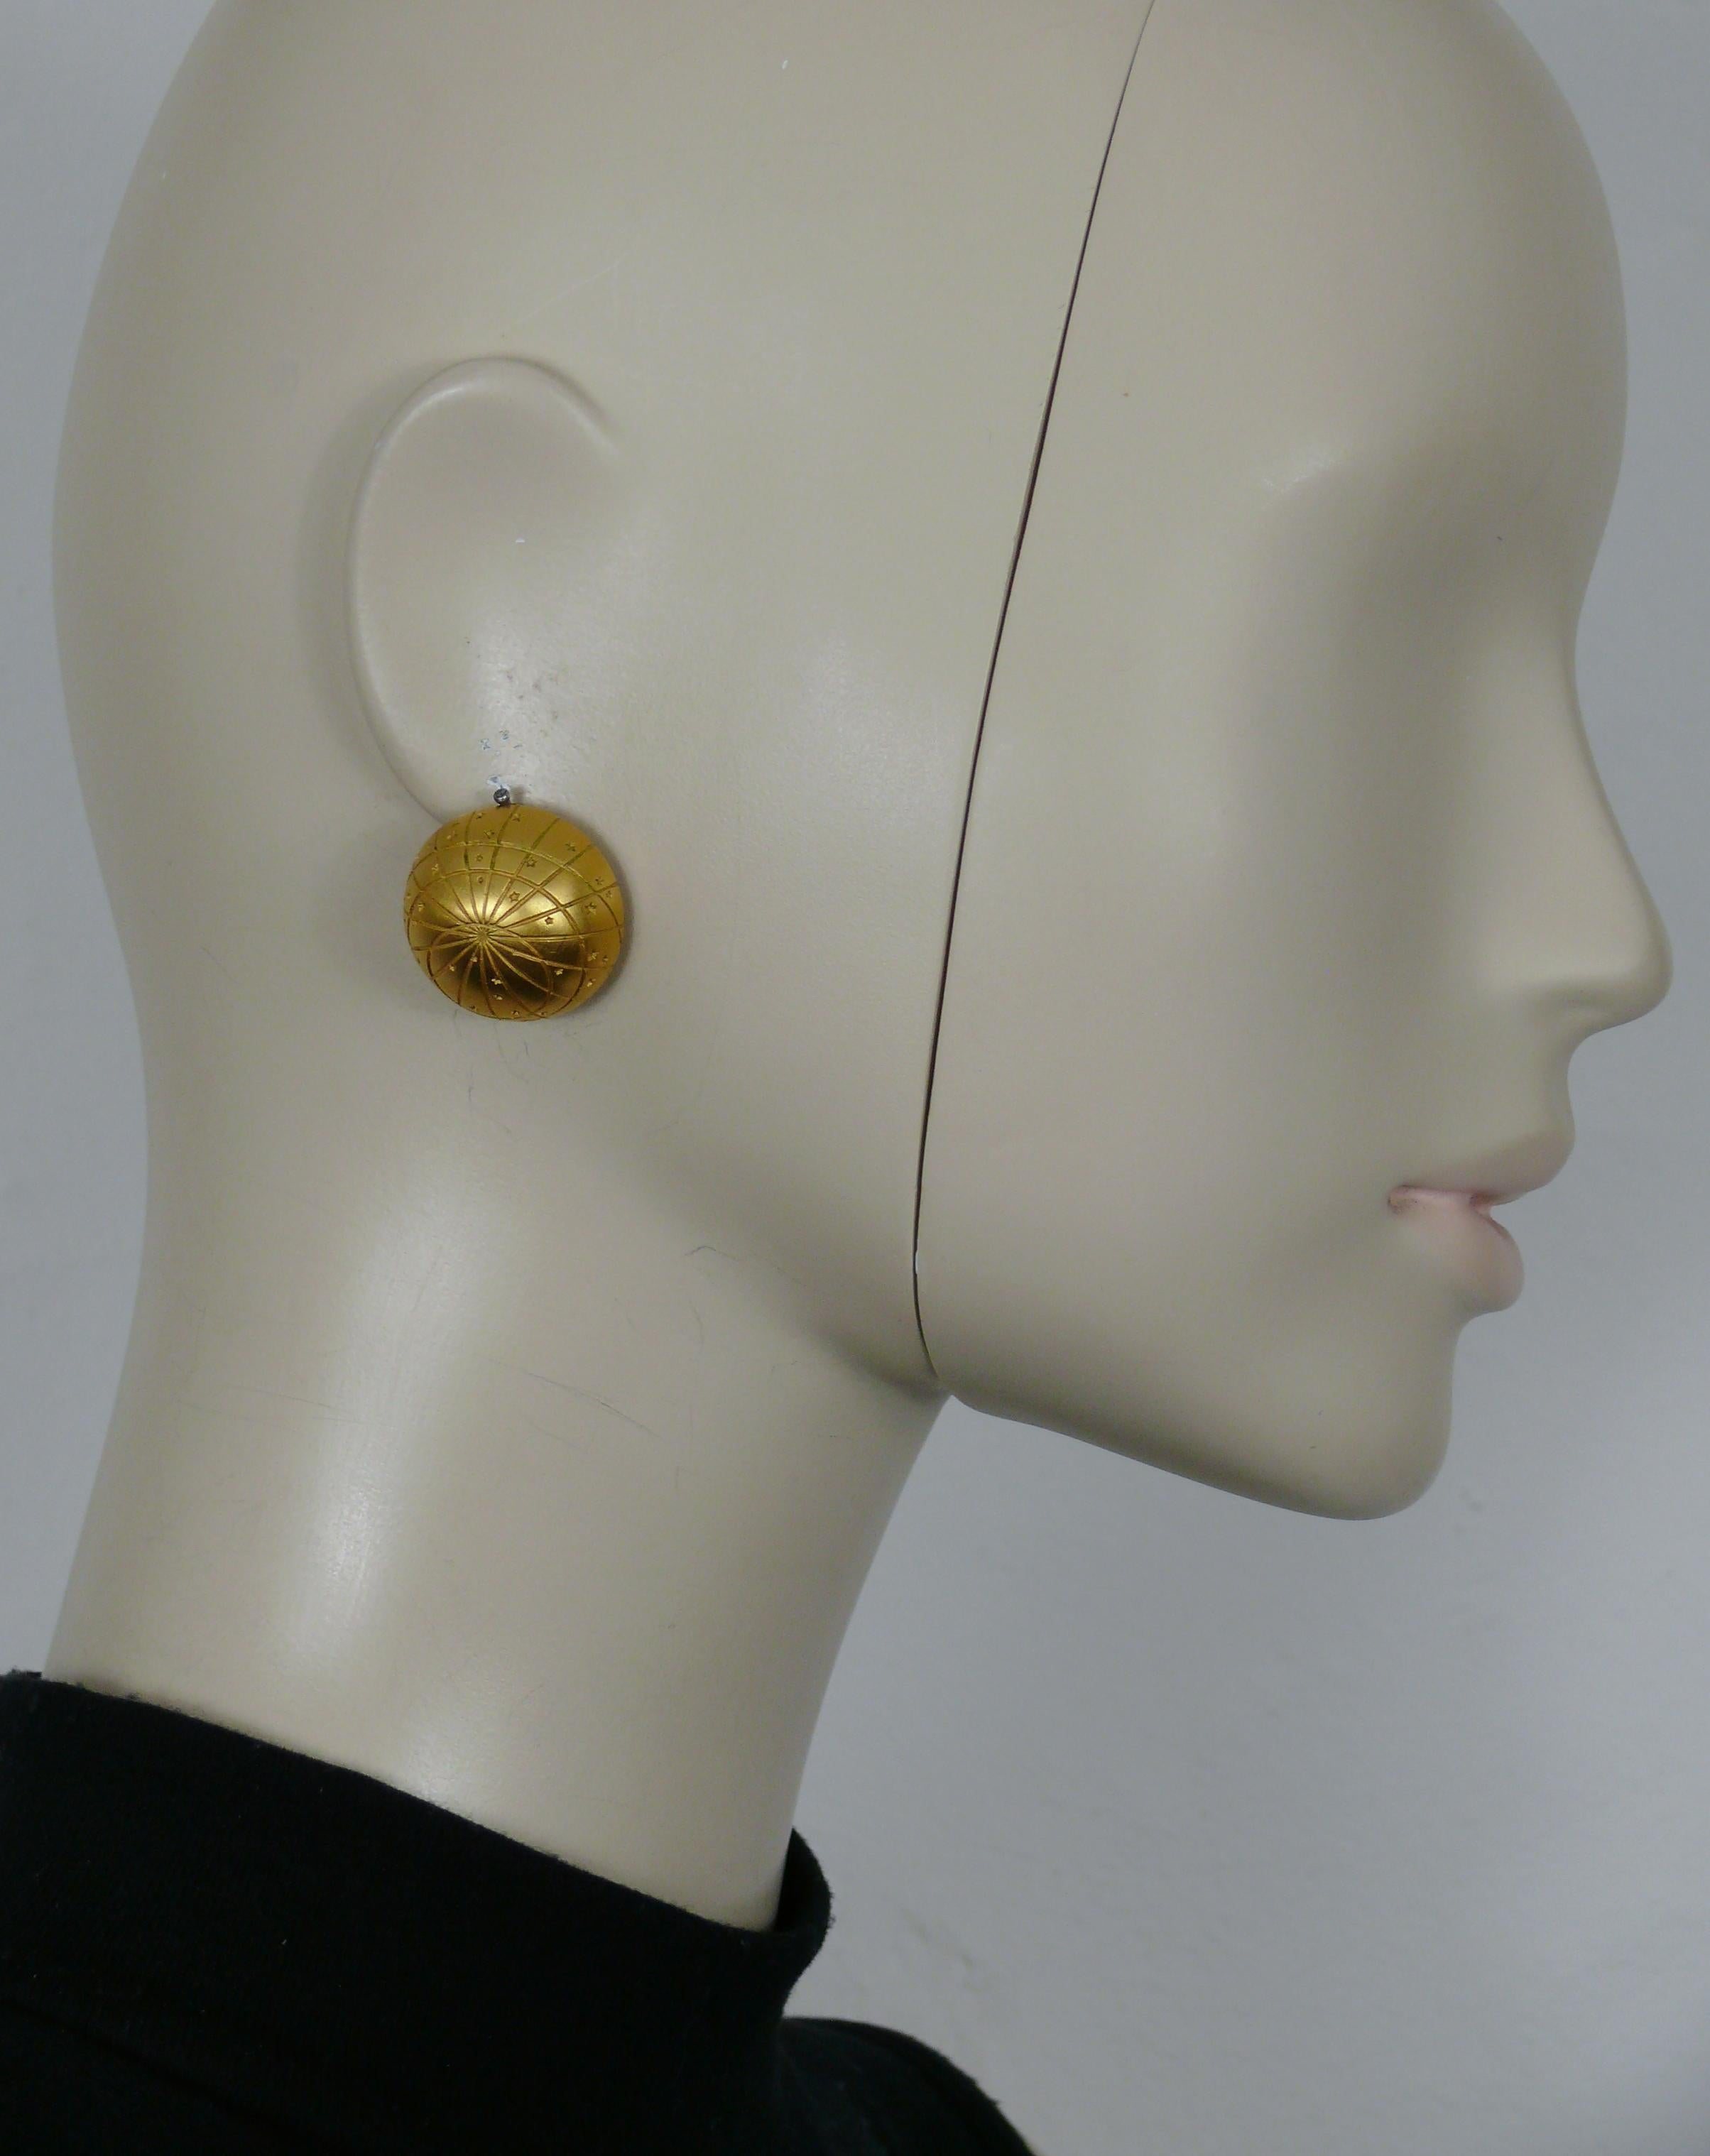 HERMES vintage gold tone celestial dome clip on earrings.

Embossed HERMES BIJOUTERIE FANTAISIE PARIS.

Indicative measurements : diameter approx. 2.5 cm (0.98 inch).

Weight per earring : approx. 14 grams.

Material : Gold tone metal